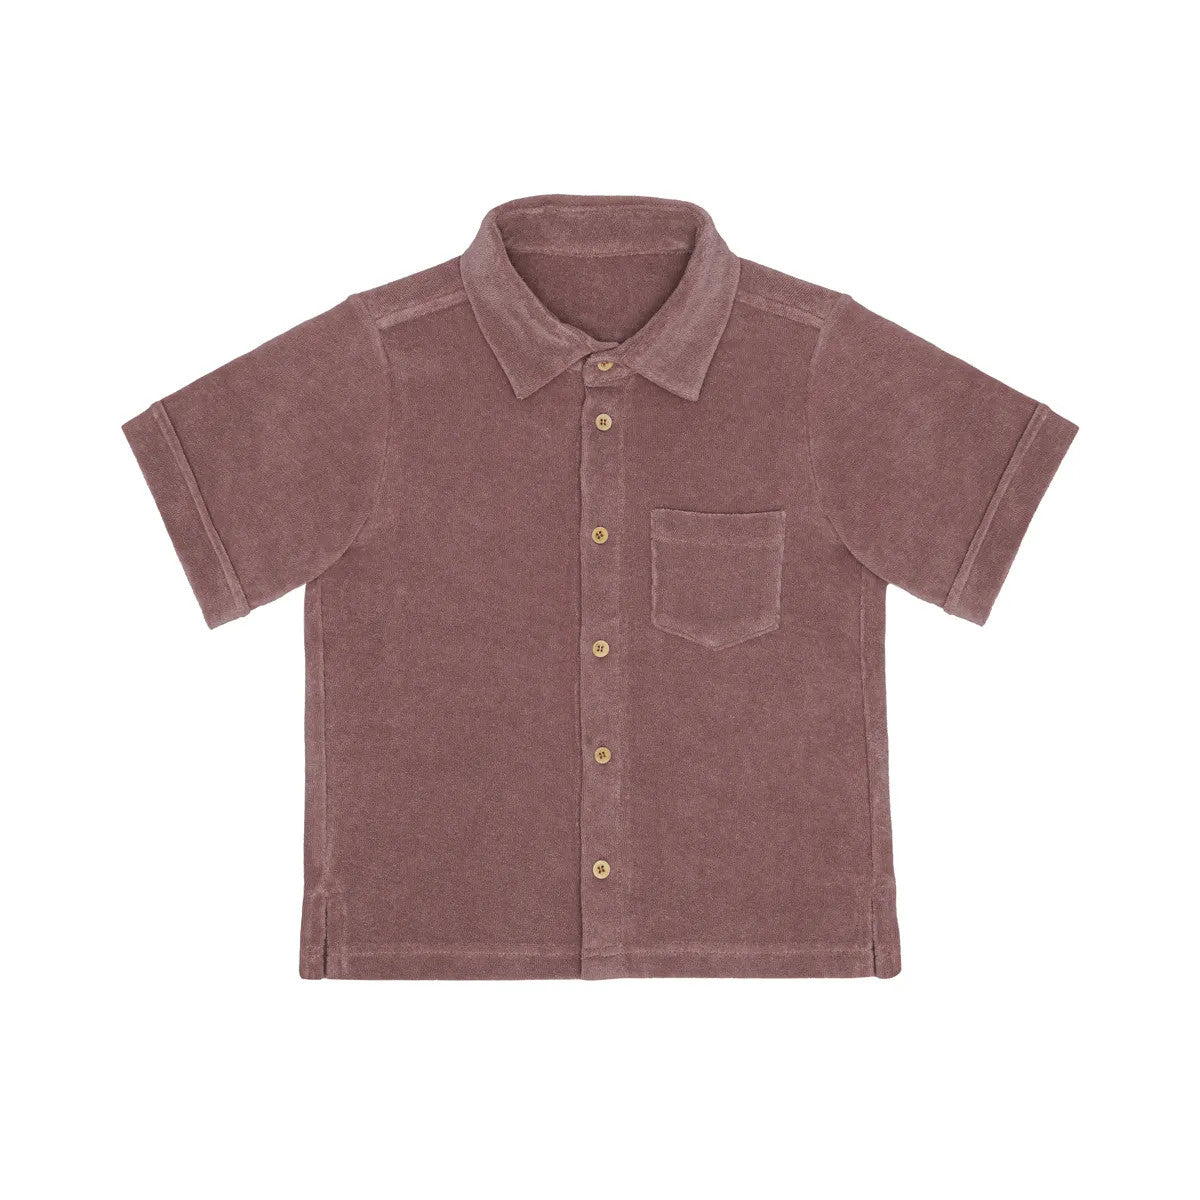 Super soft Little Hedonist old rose organic button down shirt for boys and girls. Sustainable unisex kids clothing made from organic cotton.